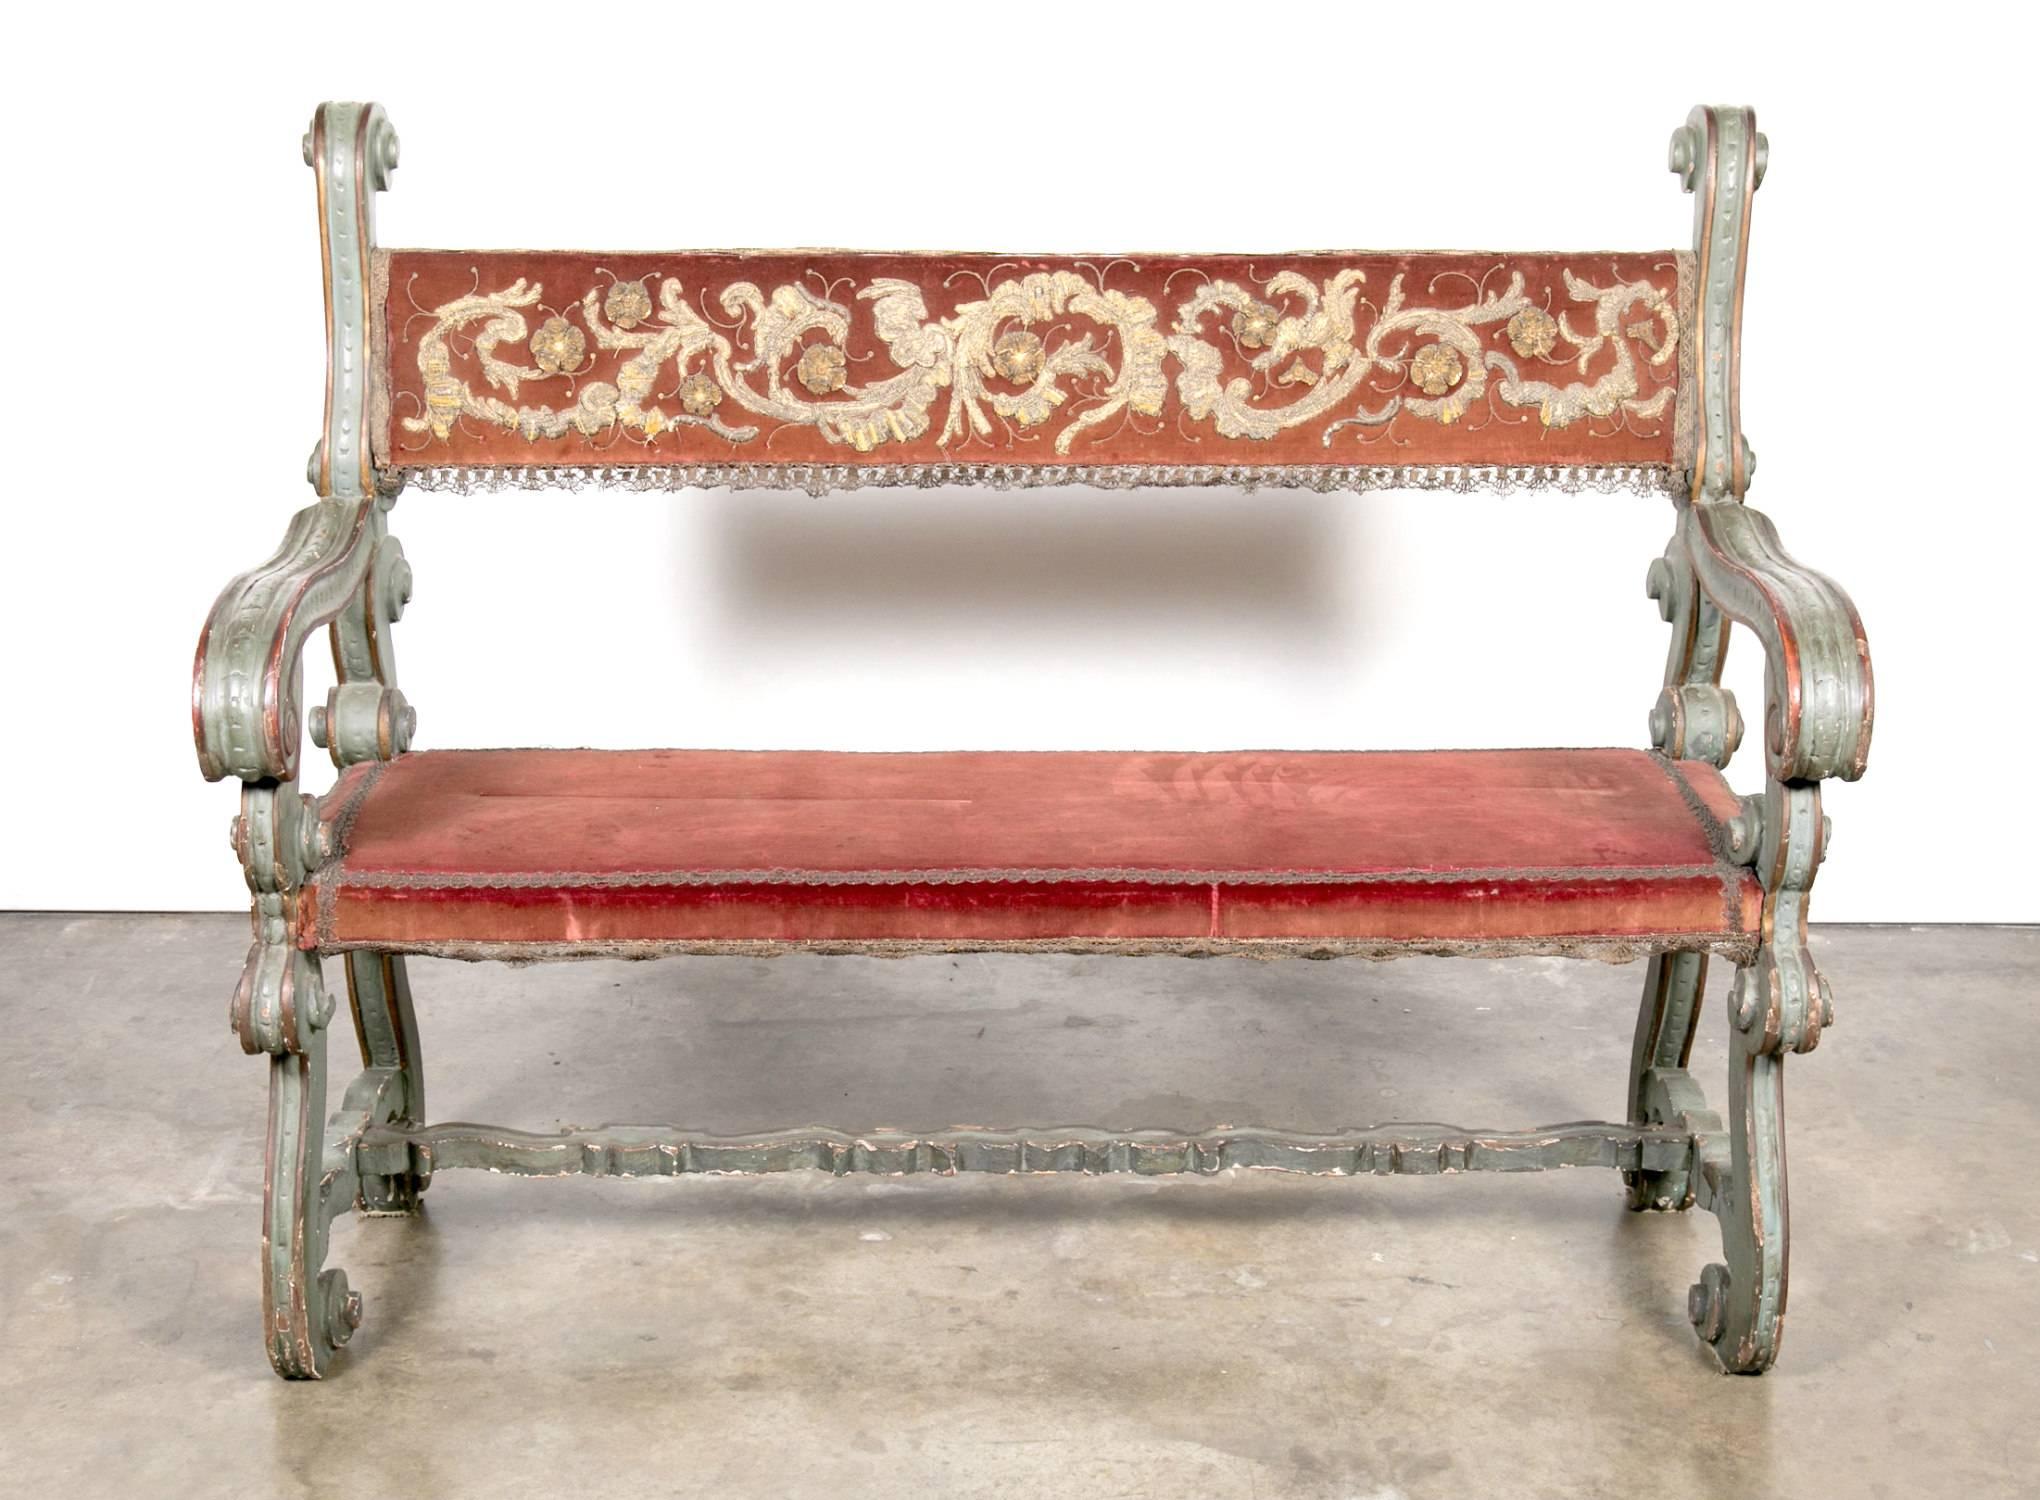 Pair of 18th Century Carved and Painted Baroque Tuscan Arm Benches (Bestickt)